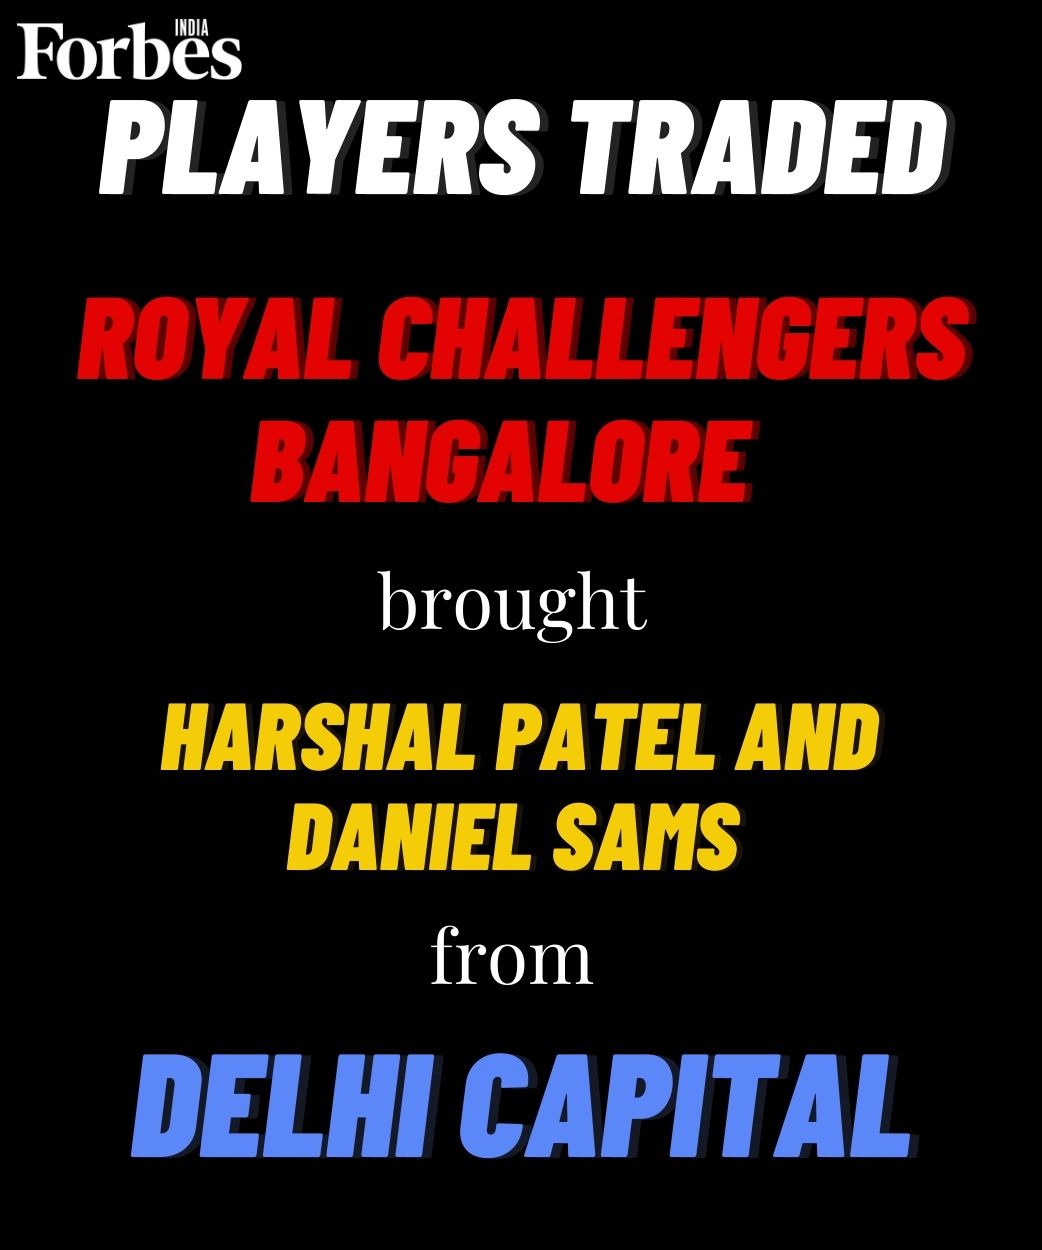 IPL 2021: From Steve Smith to Harbhajan Singh, players released ahead of auctions